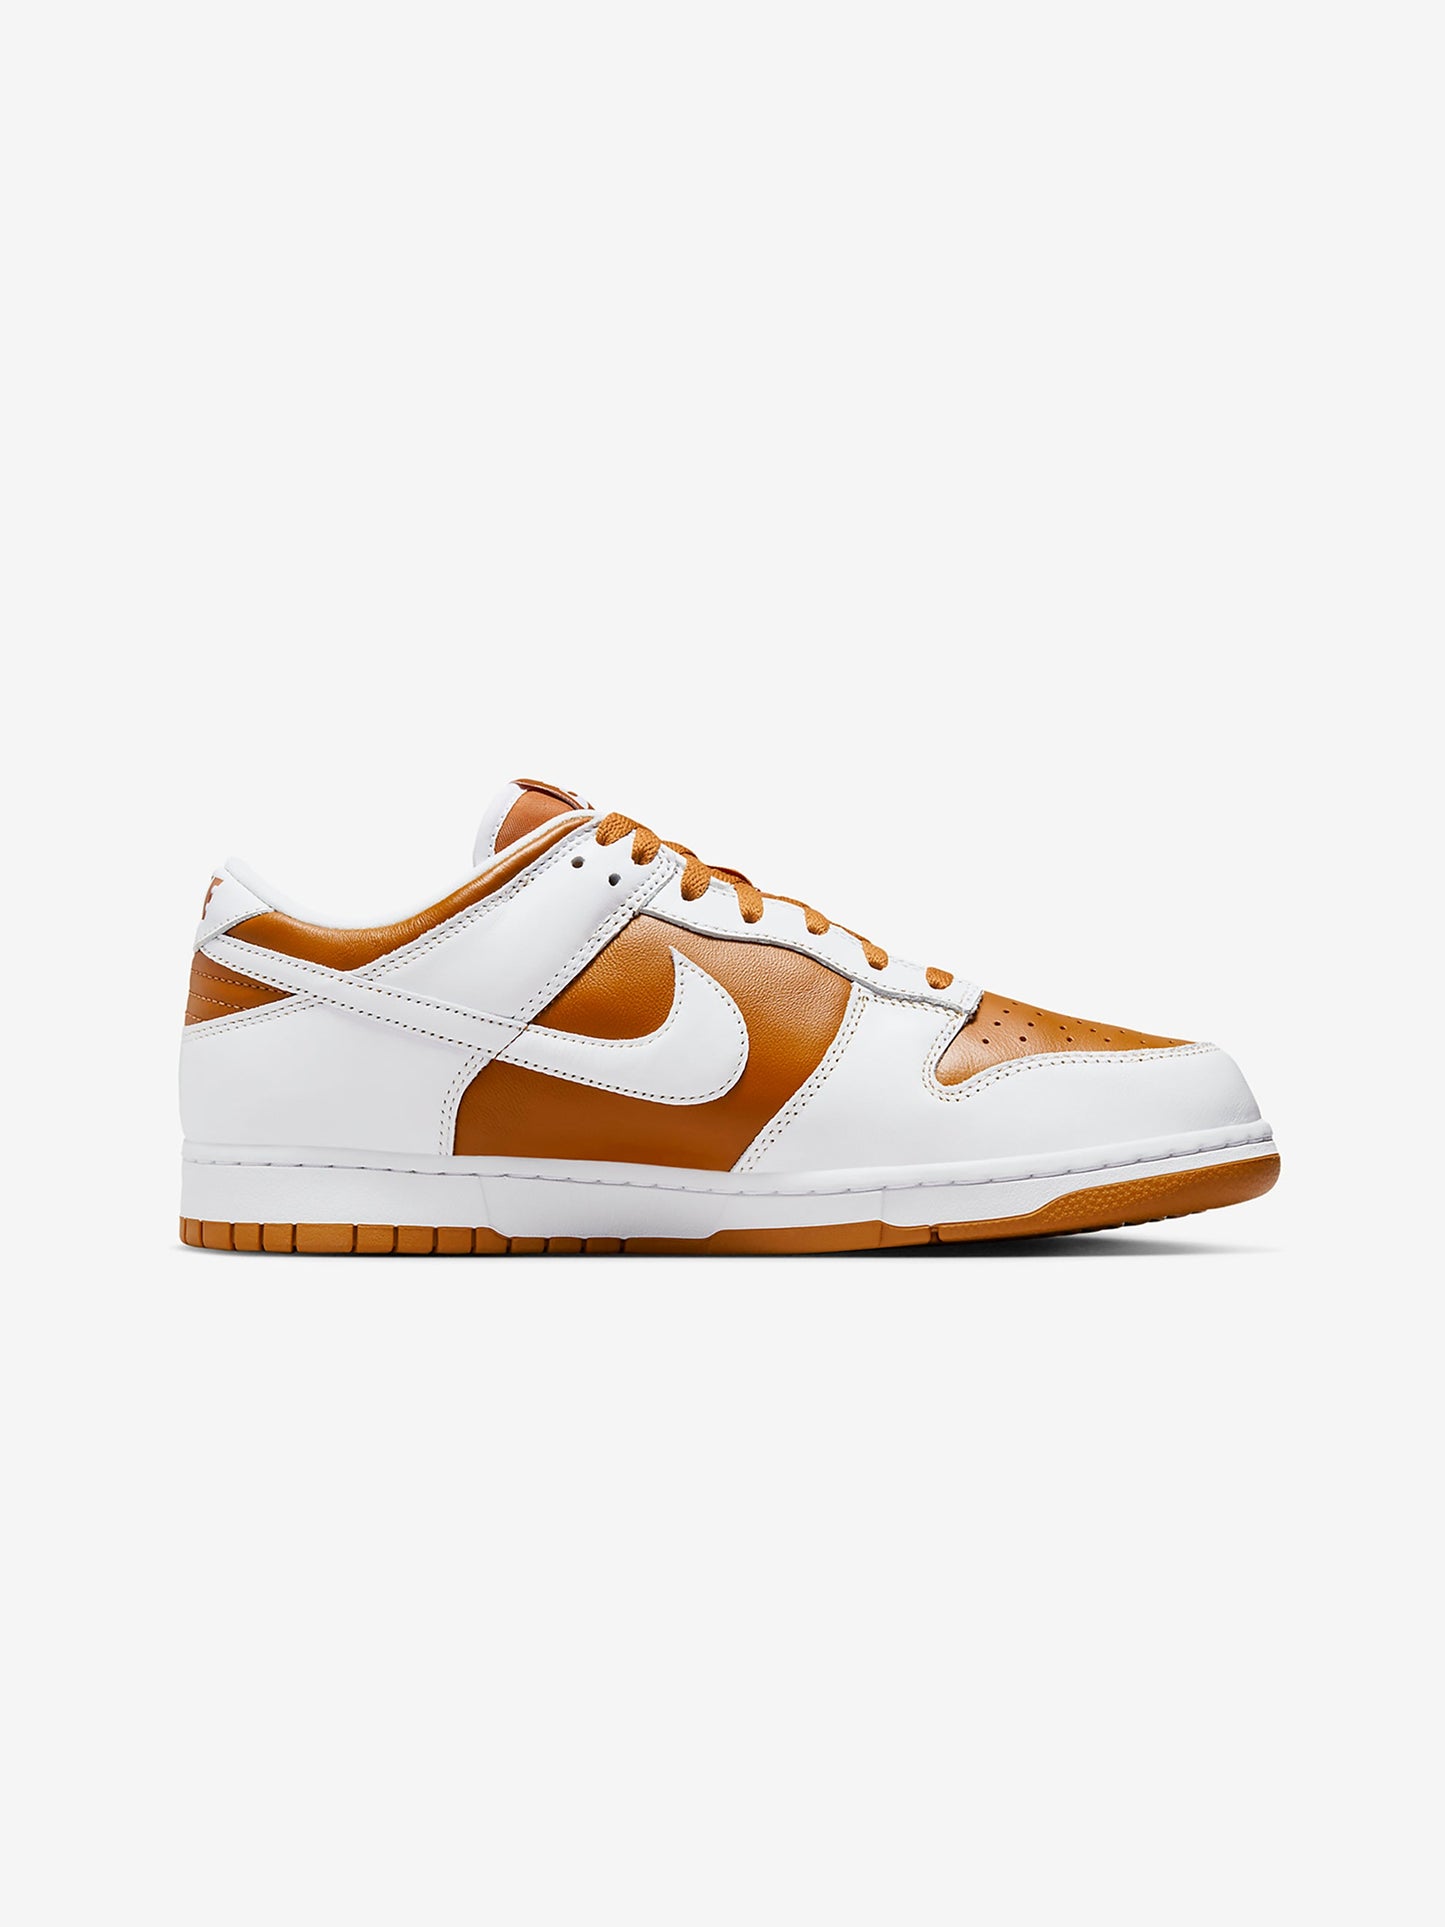 Nike Dunk Low QS (Dark Curry)